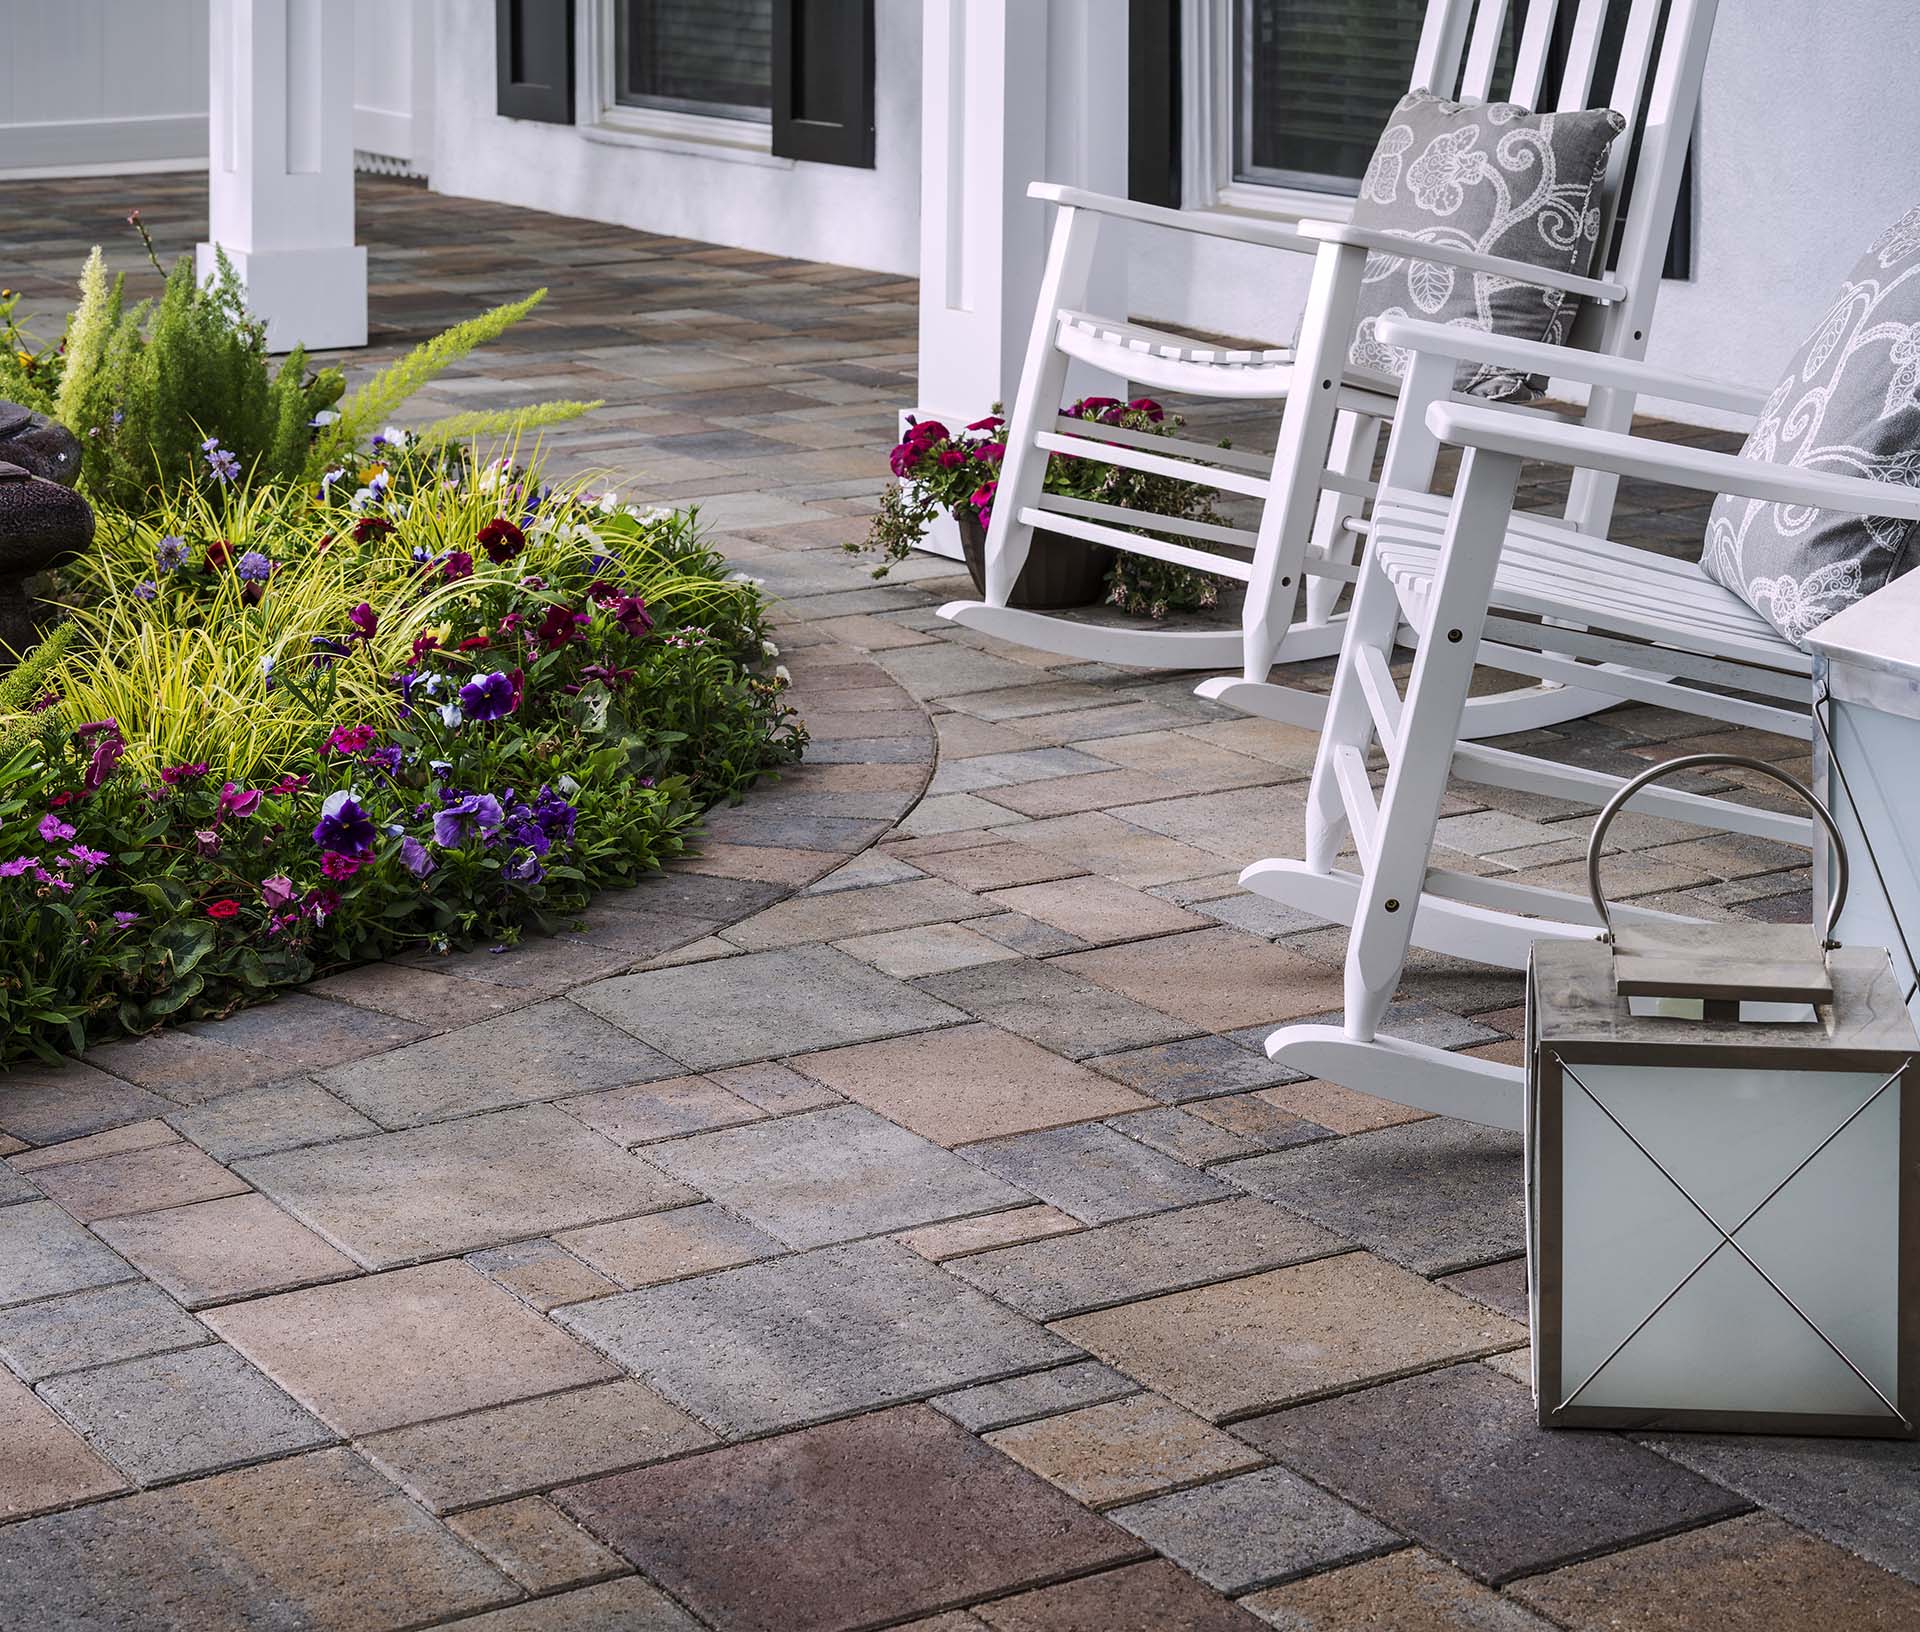 59 Beautiful Paver Patio Ideas for Your Home